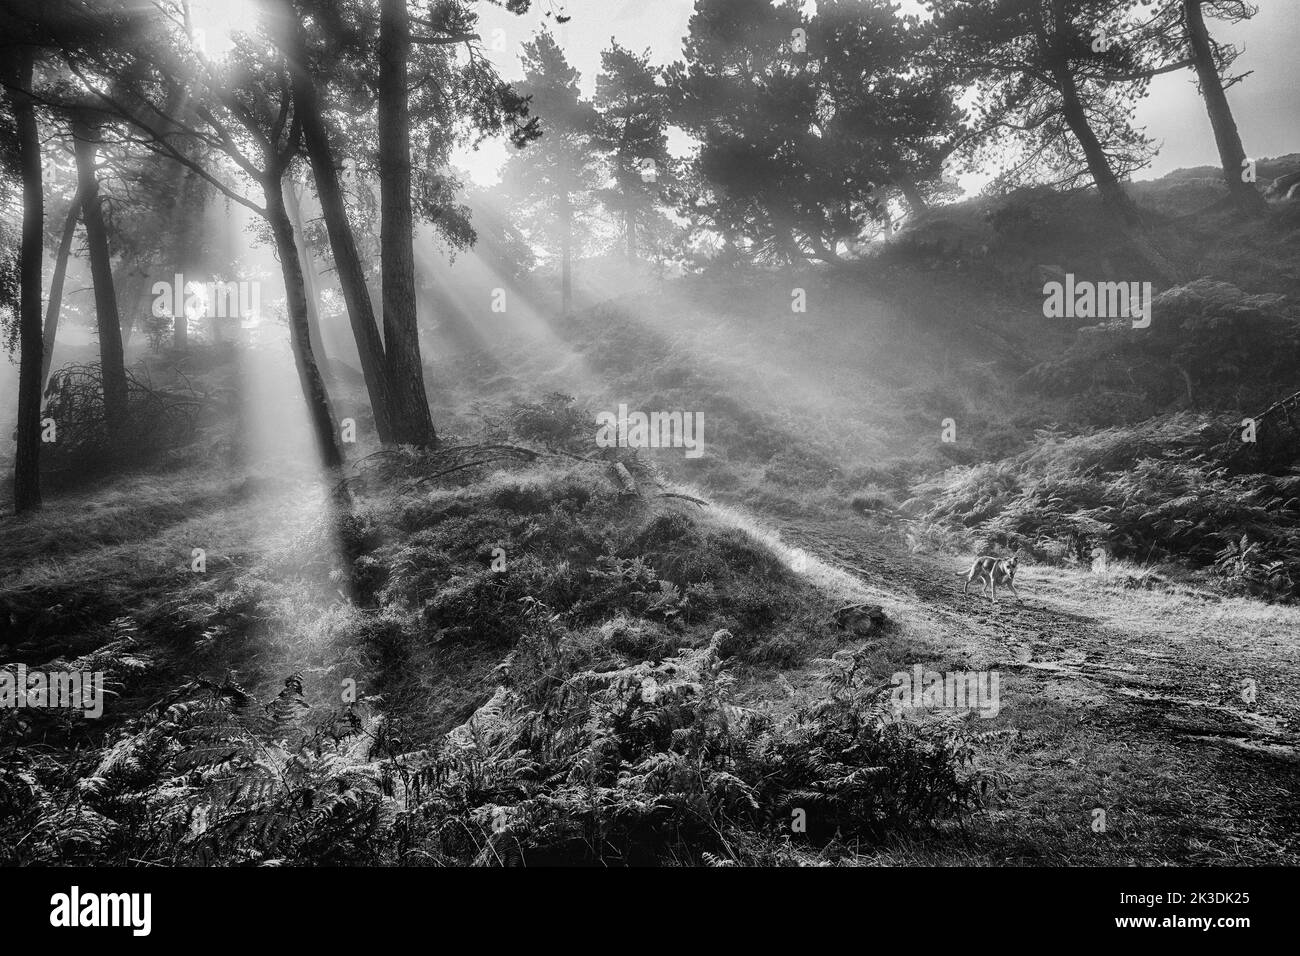 Dog running in the woods in monochrome with sunbeams shining through mist highlighting the sun's rays, Ilkley Moor, UK Stock Photo